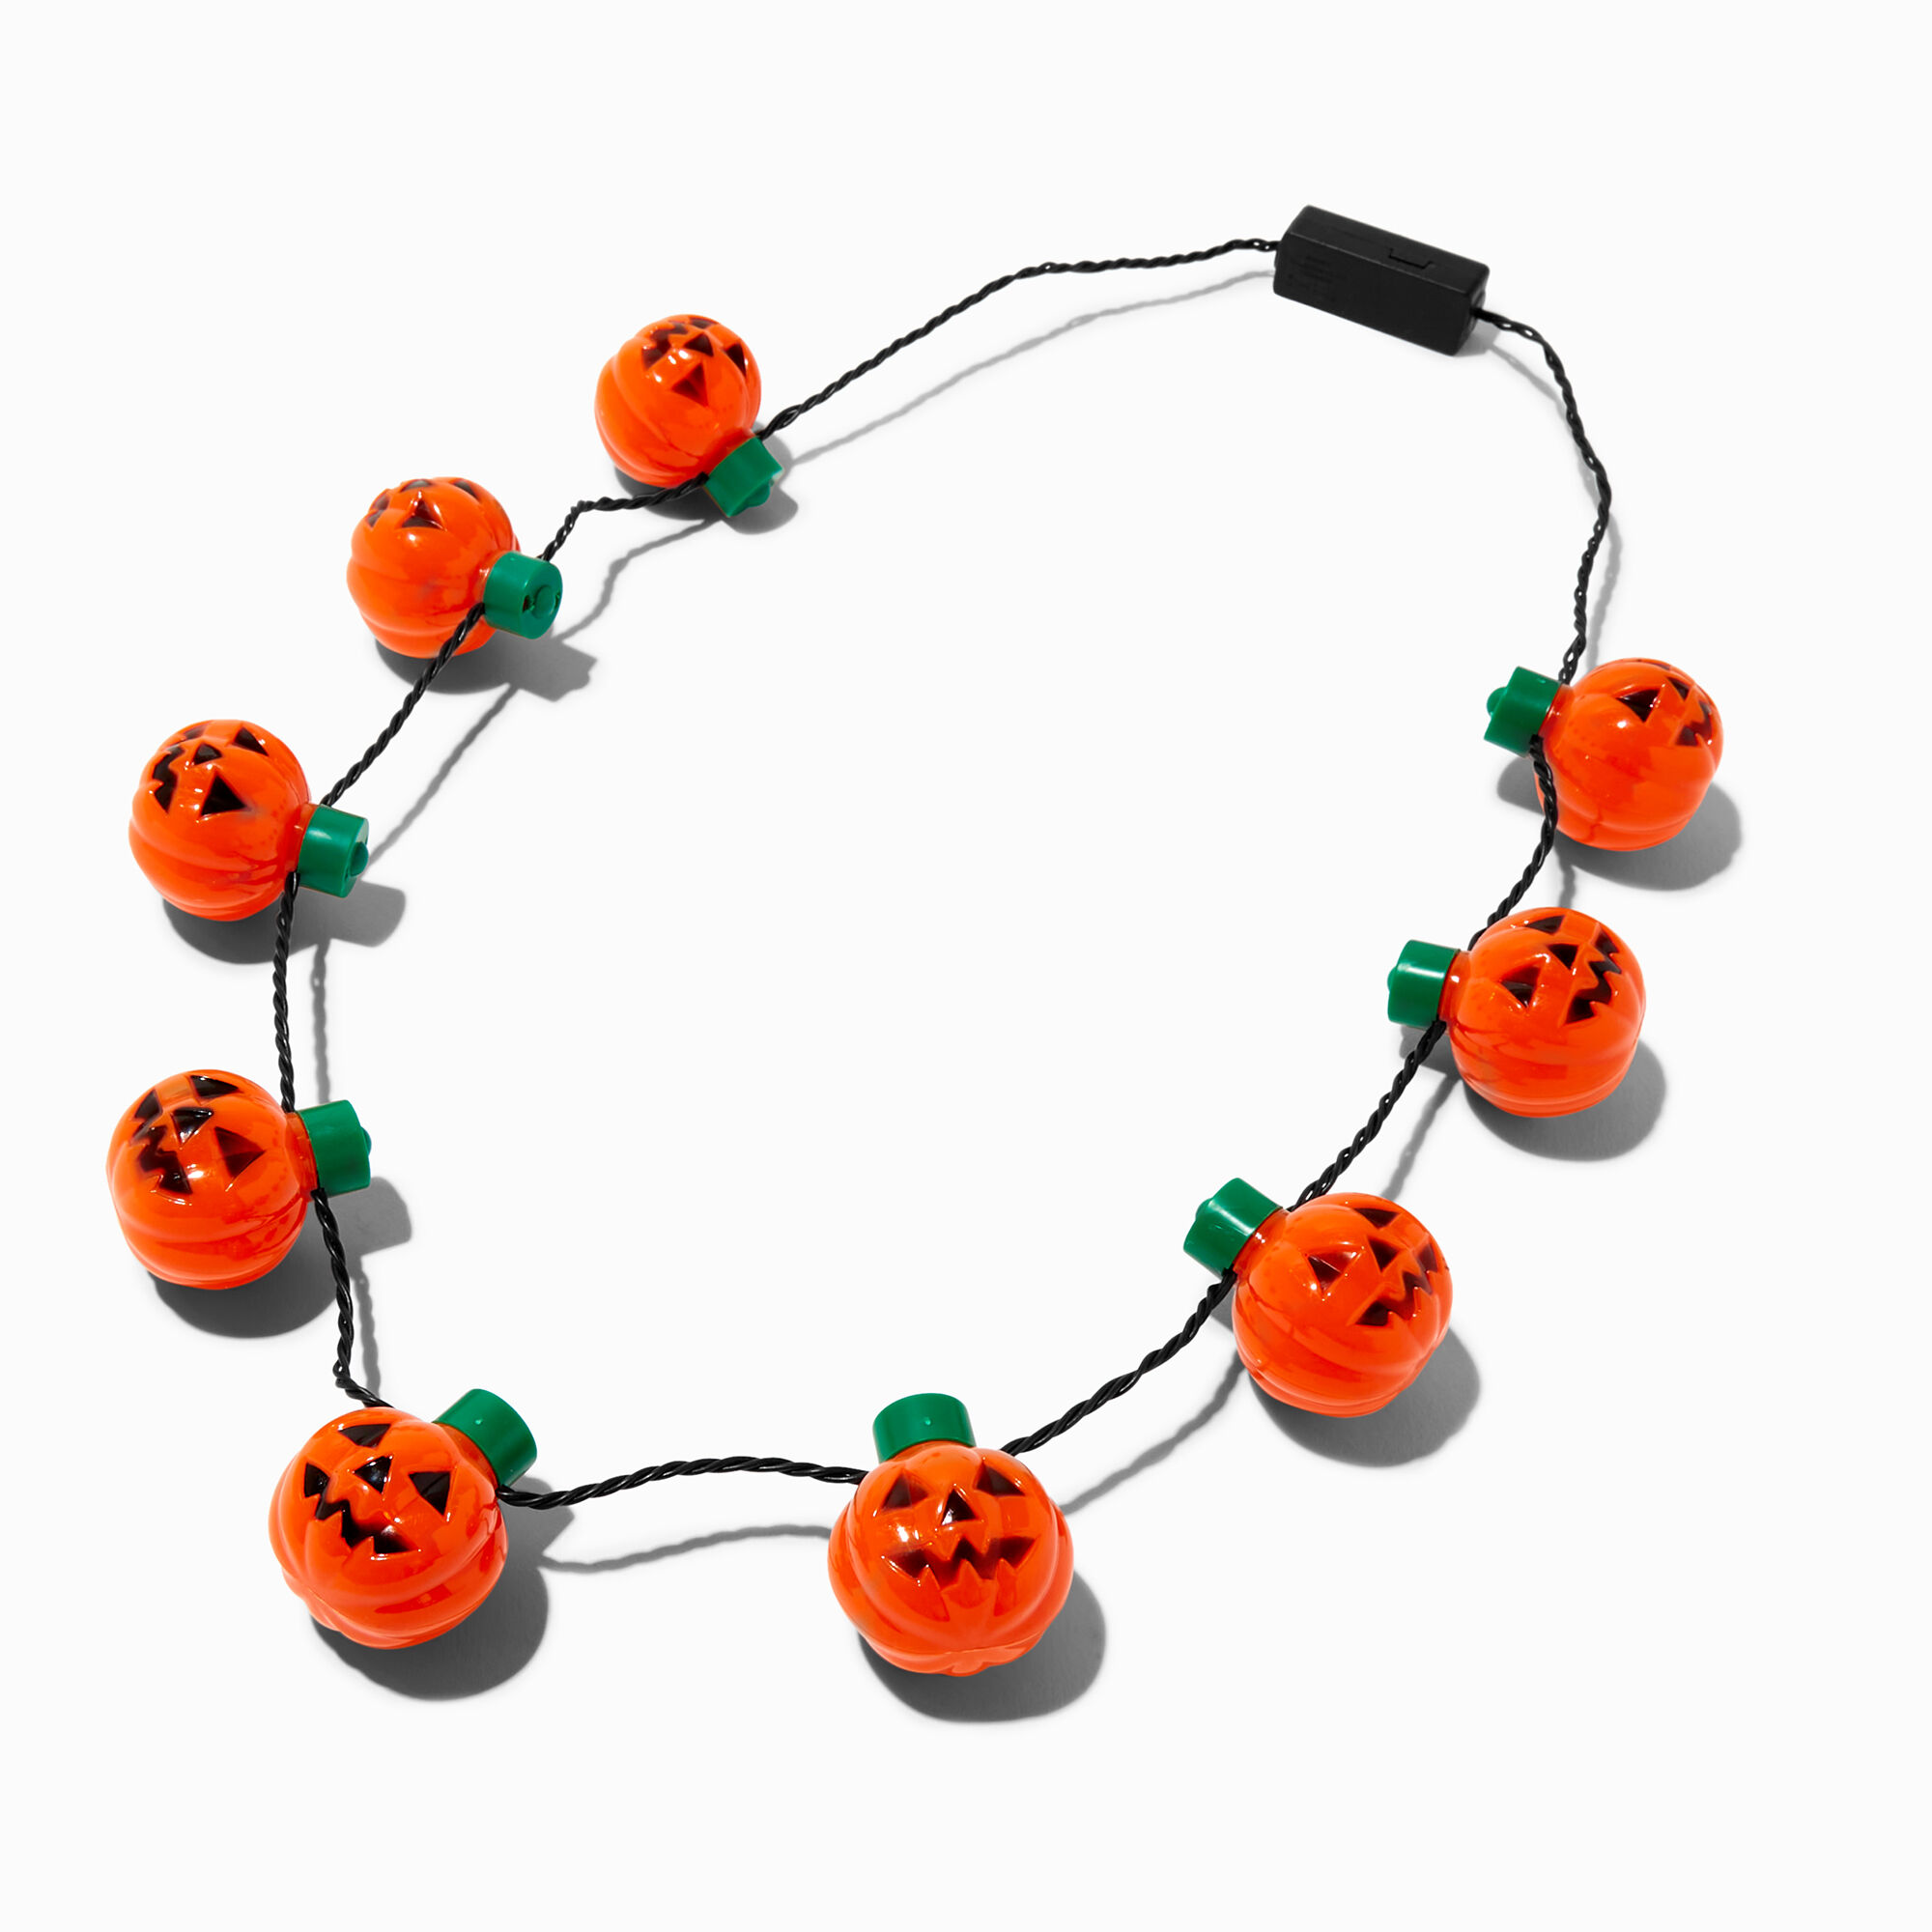 JOYIN 3 Pcs Halloween LED Necklace Pumpkin Shaped Light Up Pumpkin Necklace  with 6 Different Flashing Light Modes for Halloween Party Favor and  Supplies, Halloween Accessory Supplies : Amazon.co.uk: Toys & Games